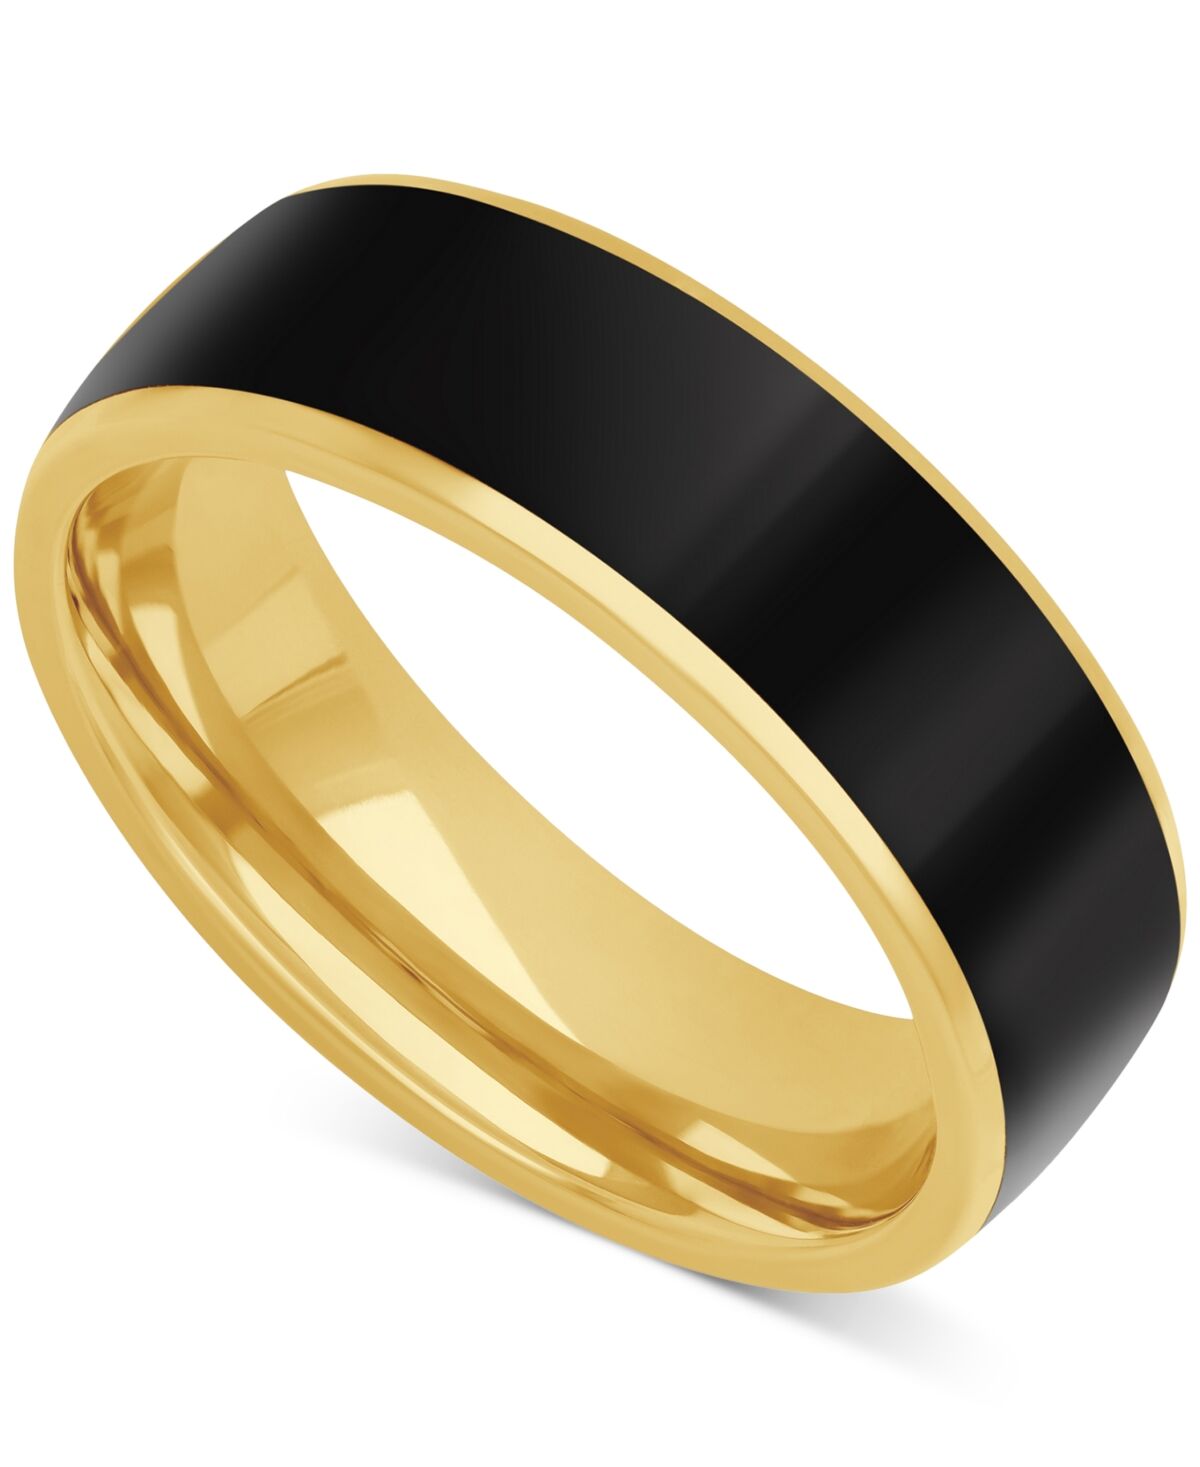 Macy's Men's Black Ceramic Inlay Low Dome Band in 18k Yellow Gold-Plated Sterling Silver - Black